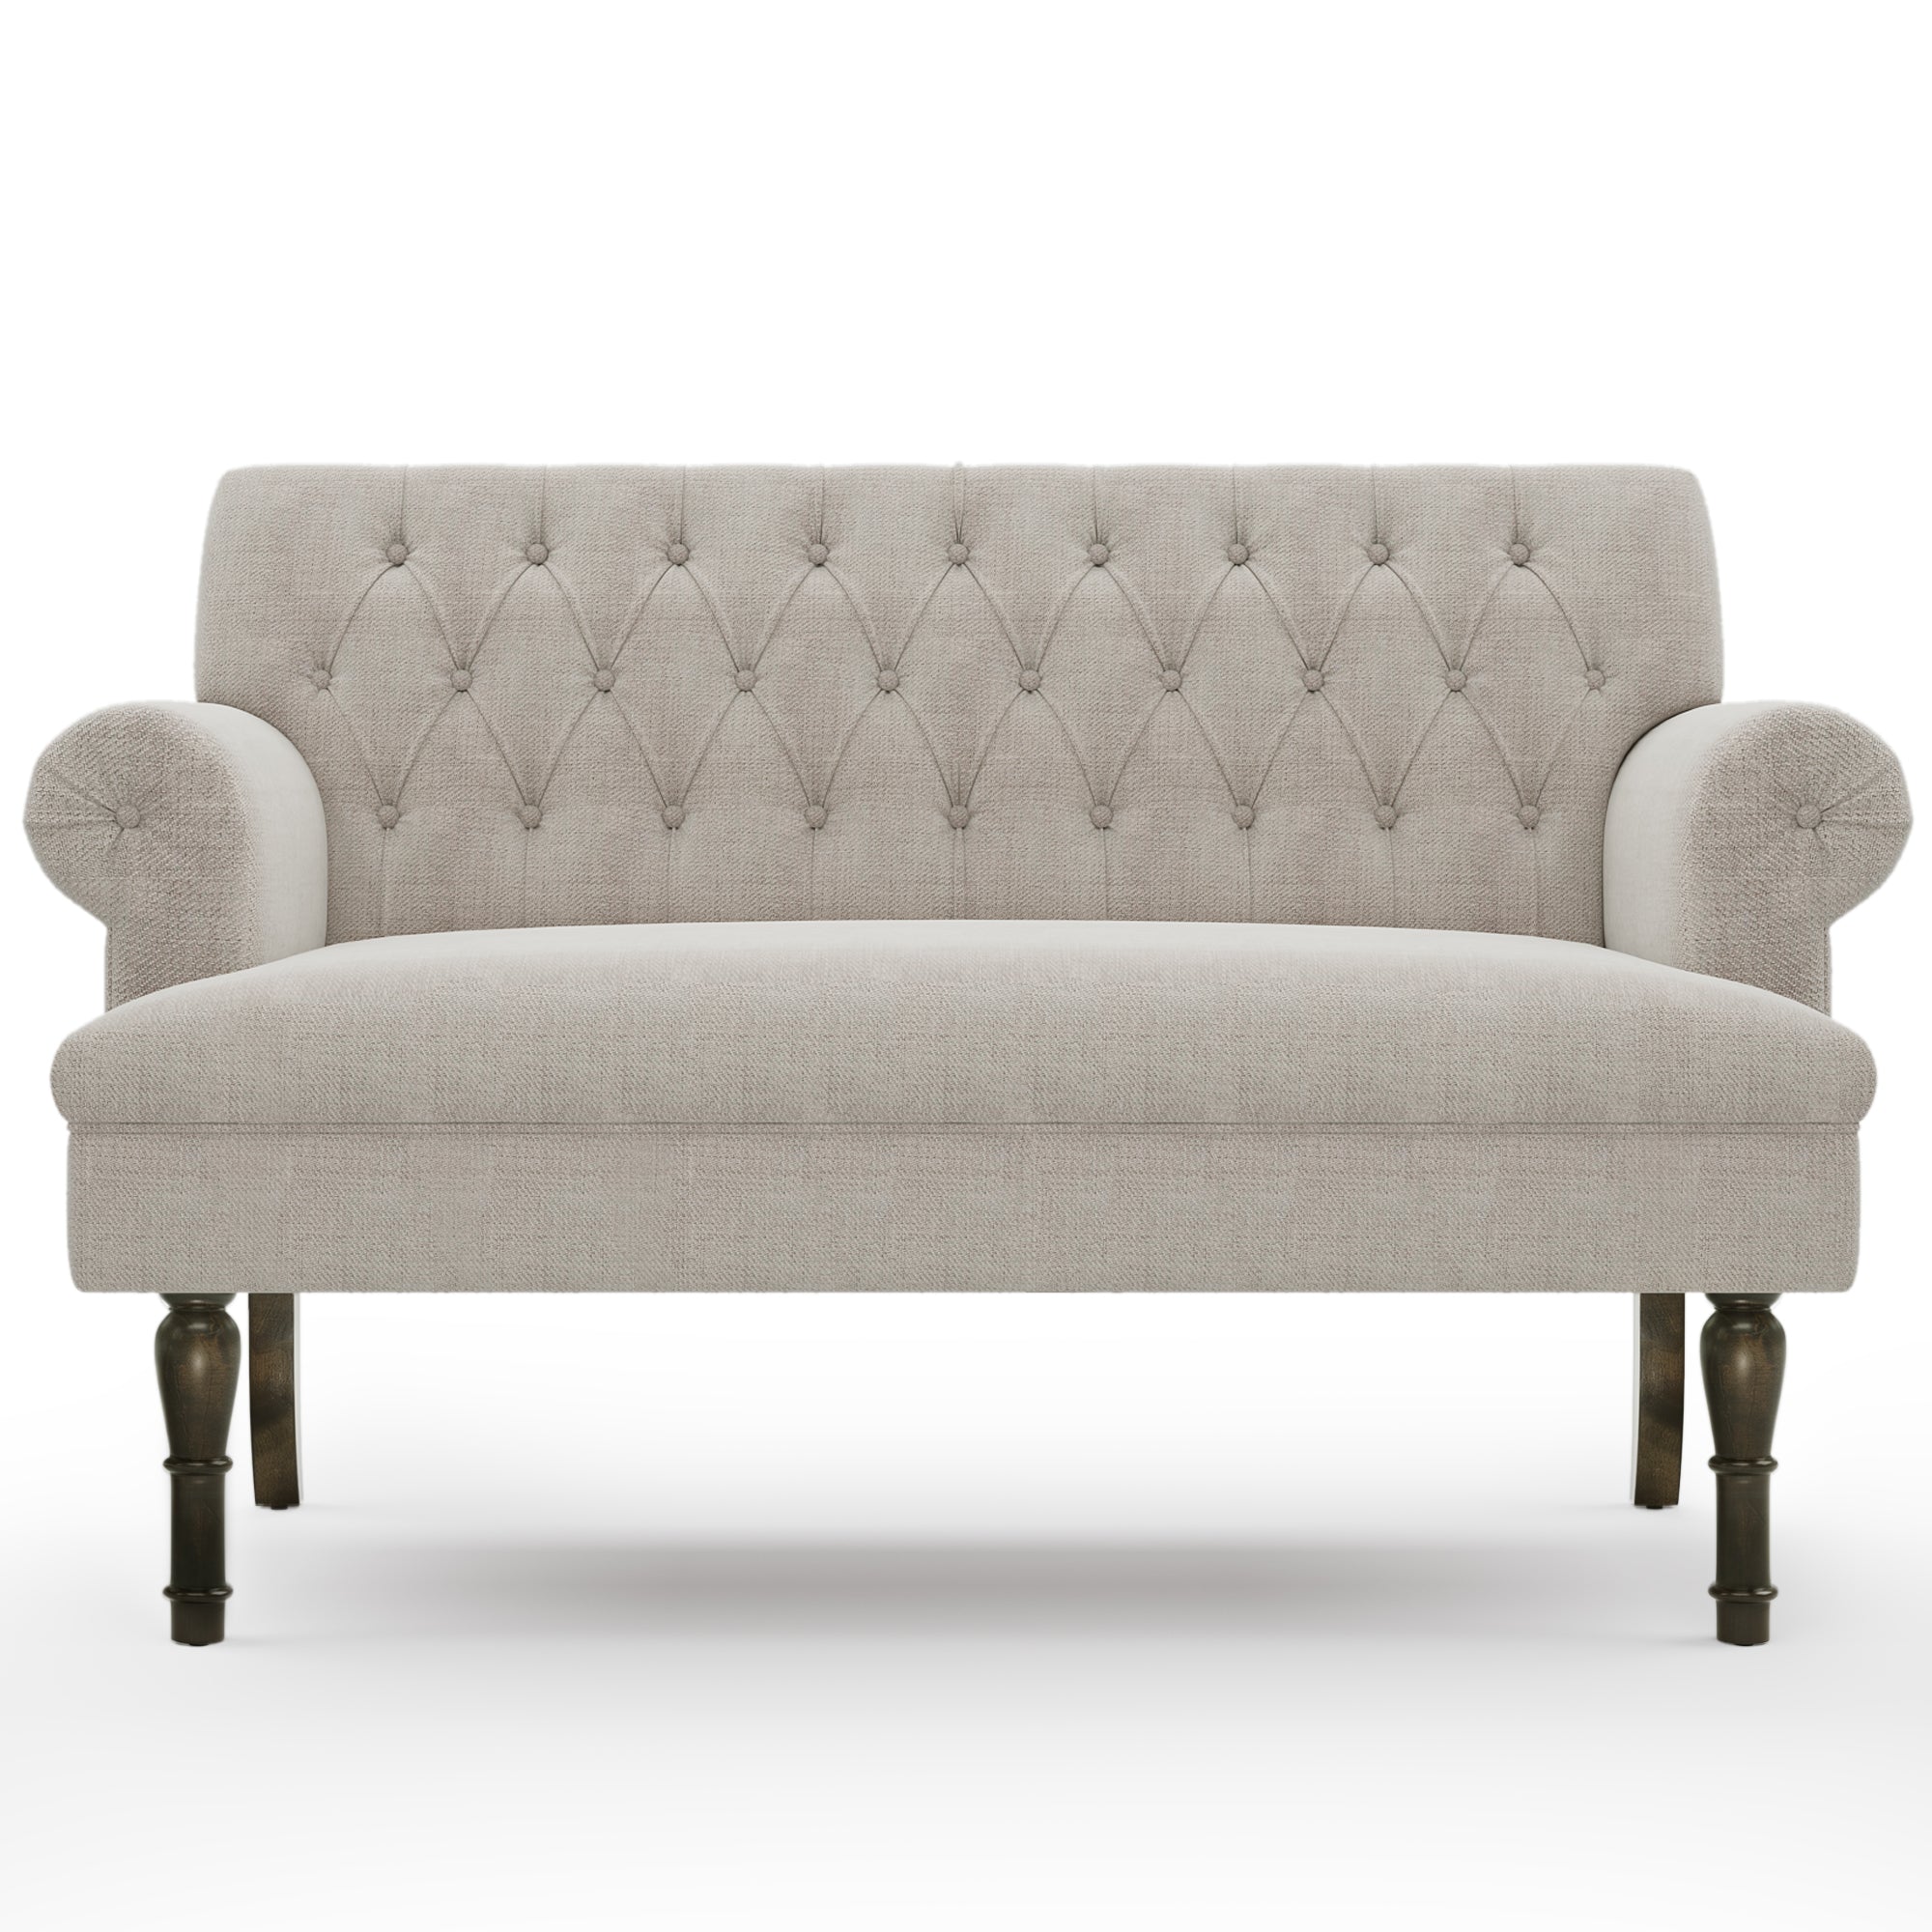 58" Linen Textured Fabric Chesterfield Settee Button Tufted Scrolled Arm Loveseat High Gourd Wood Leg Studio Bench (Pillows not included) Light Beige